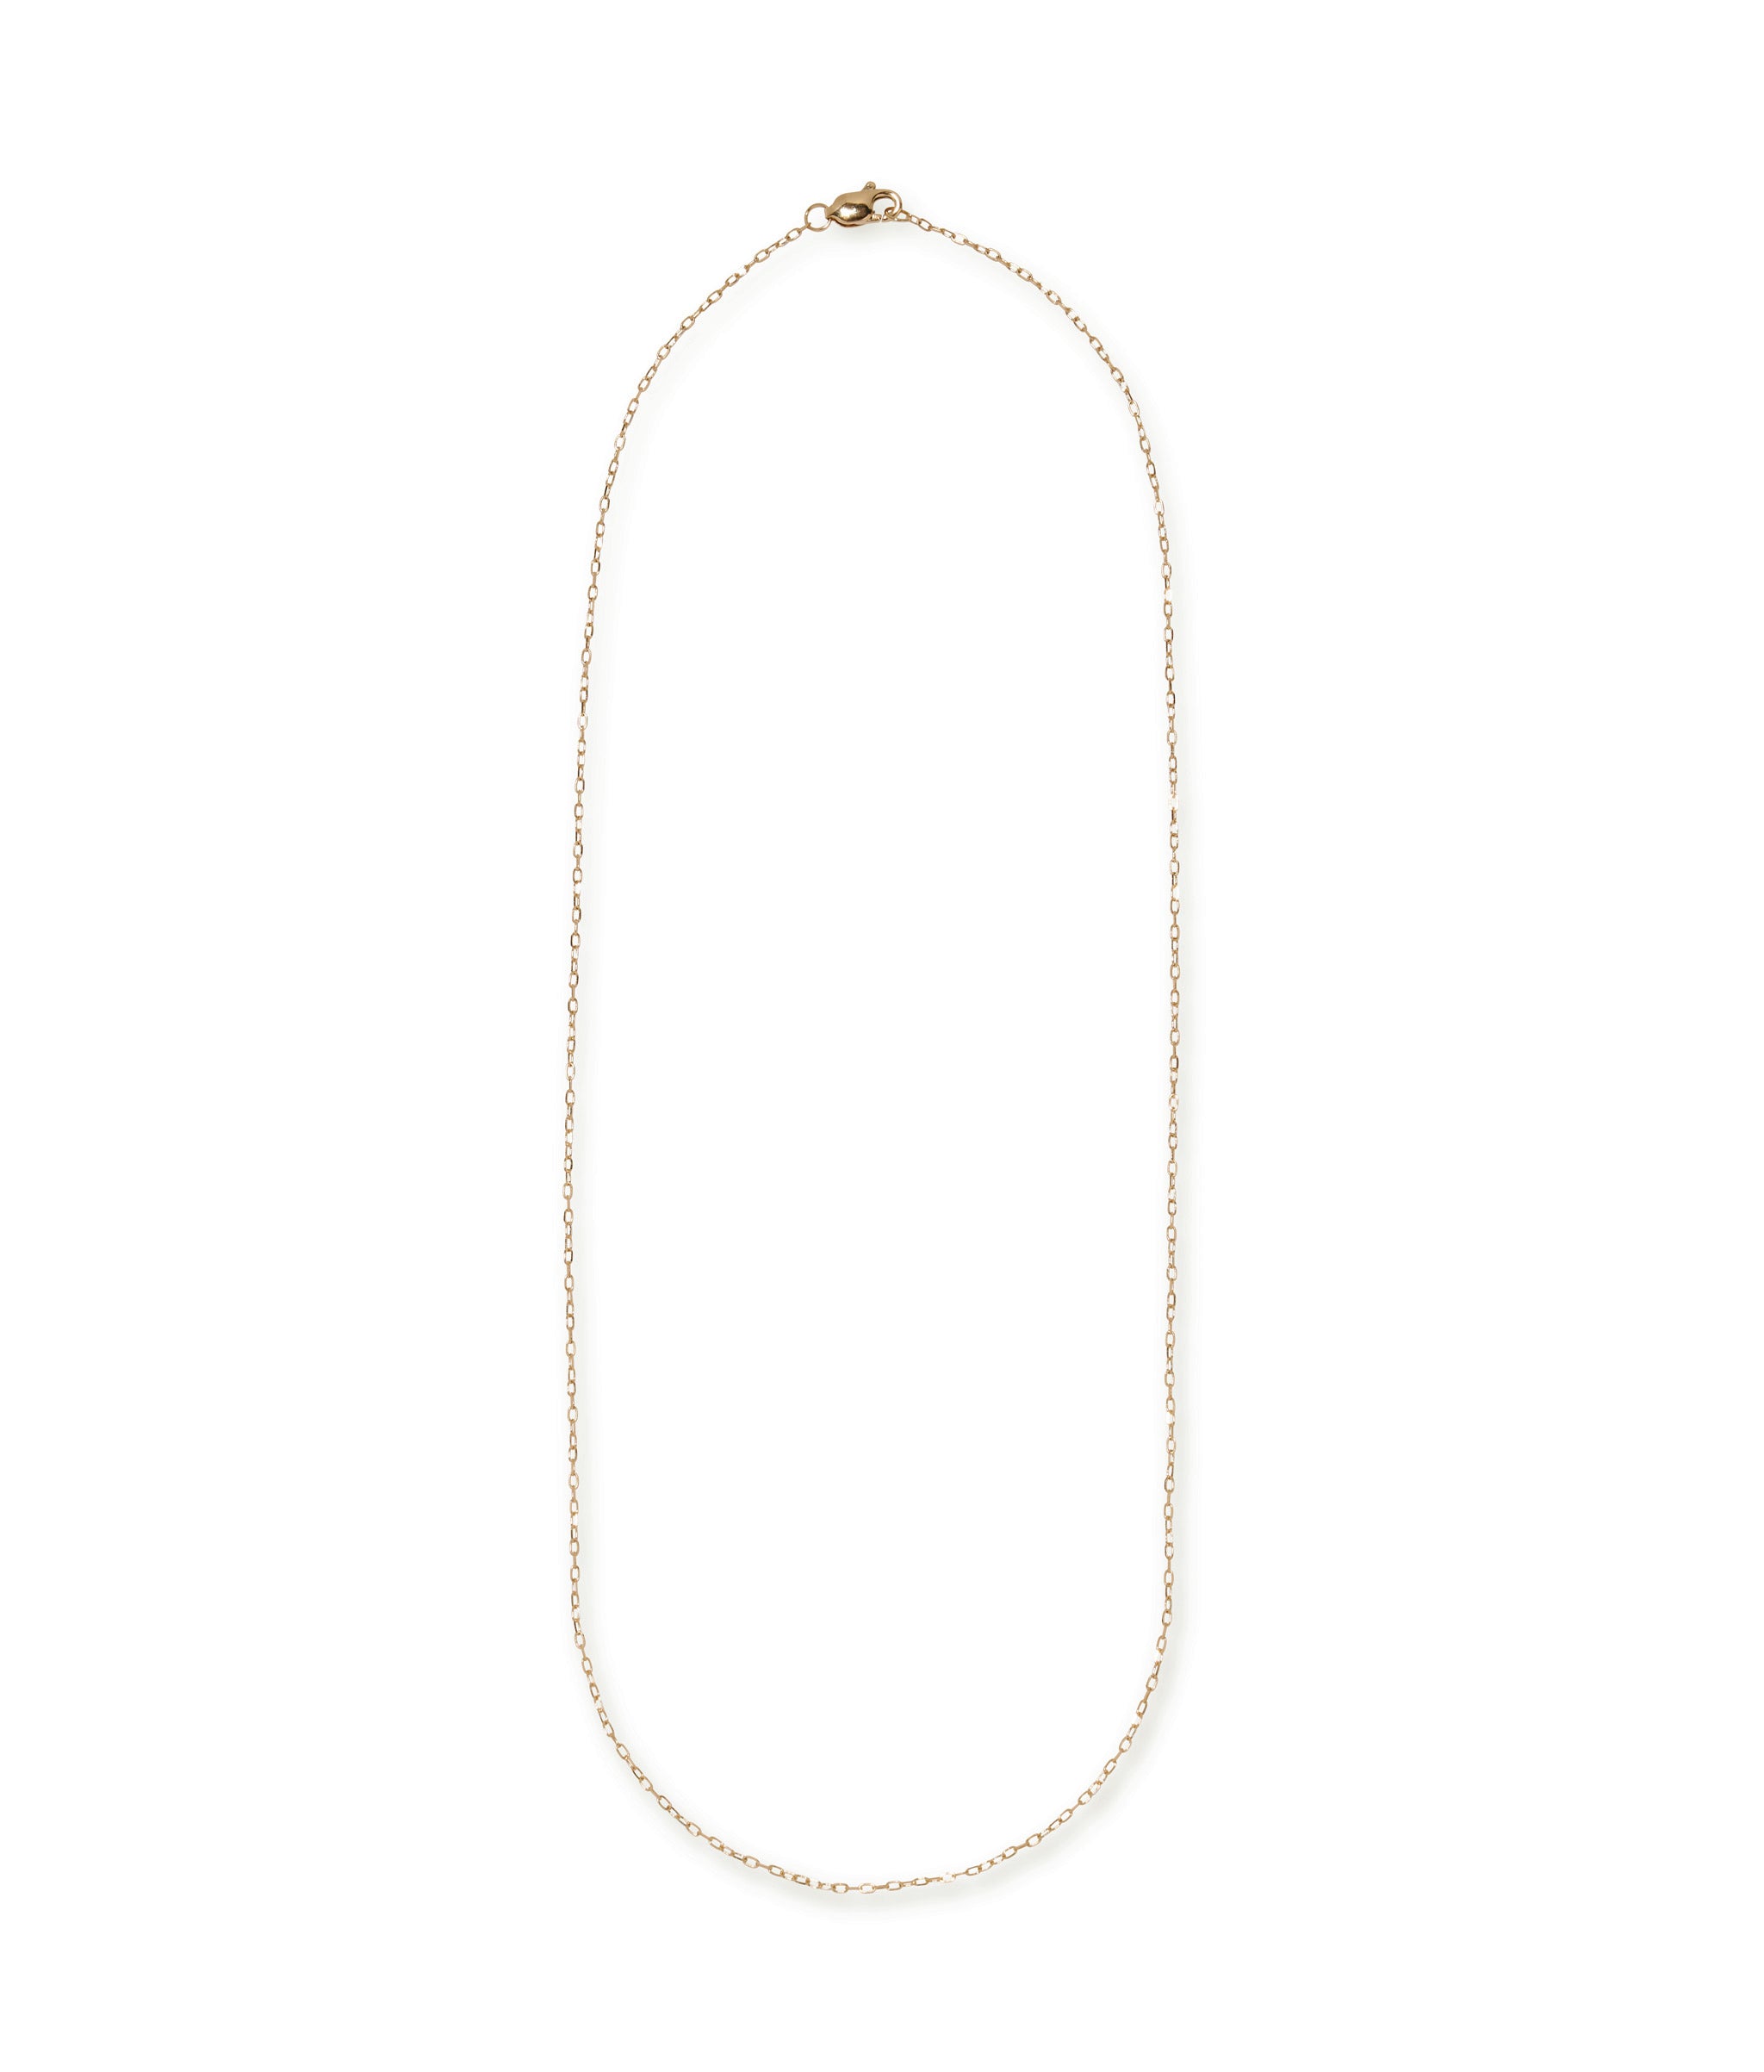 14k Gold Cable Chain Necklace. Yellow gold elongated fine cable chain necklace.